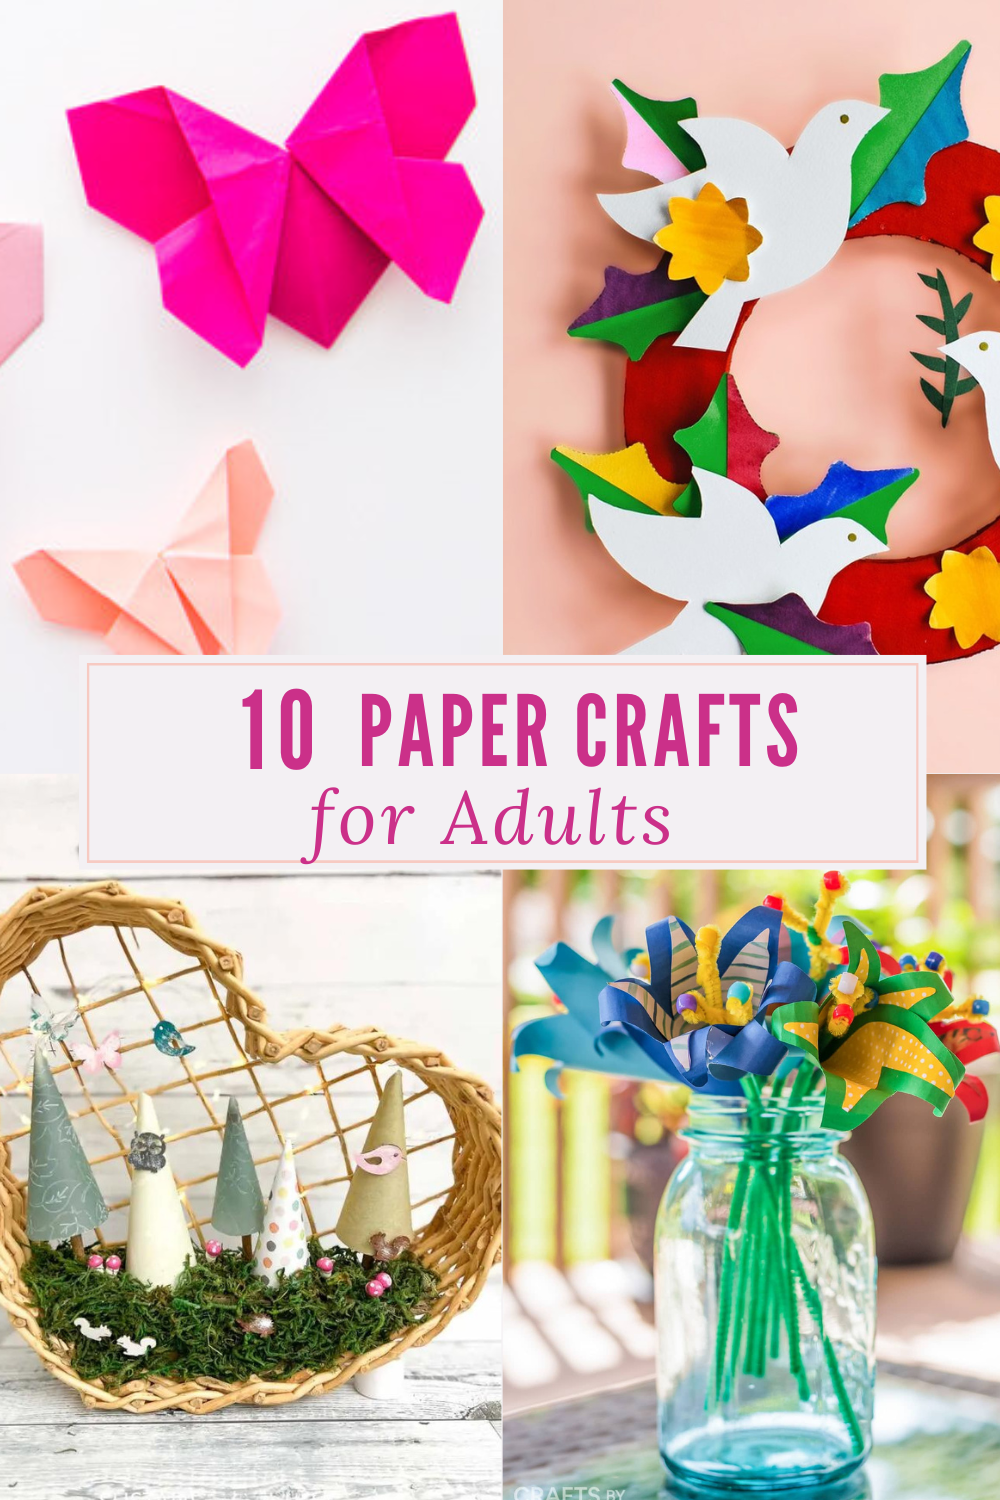 27 Creative Paper Crafts for Adults - DIY Inspired